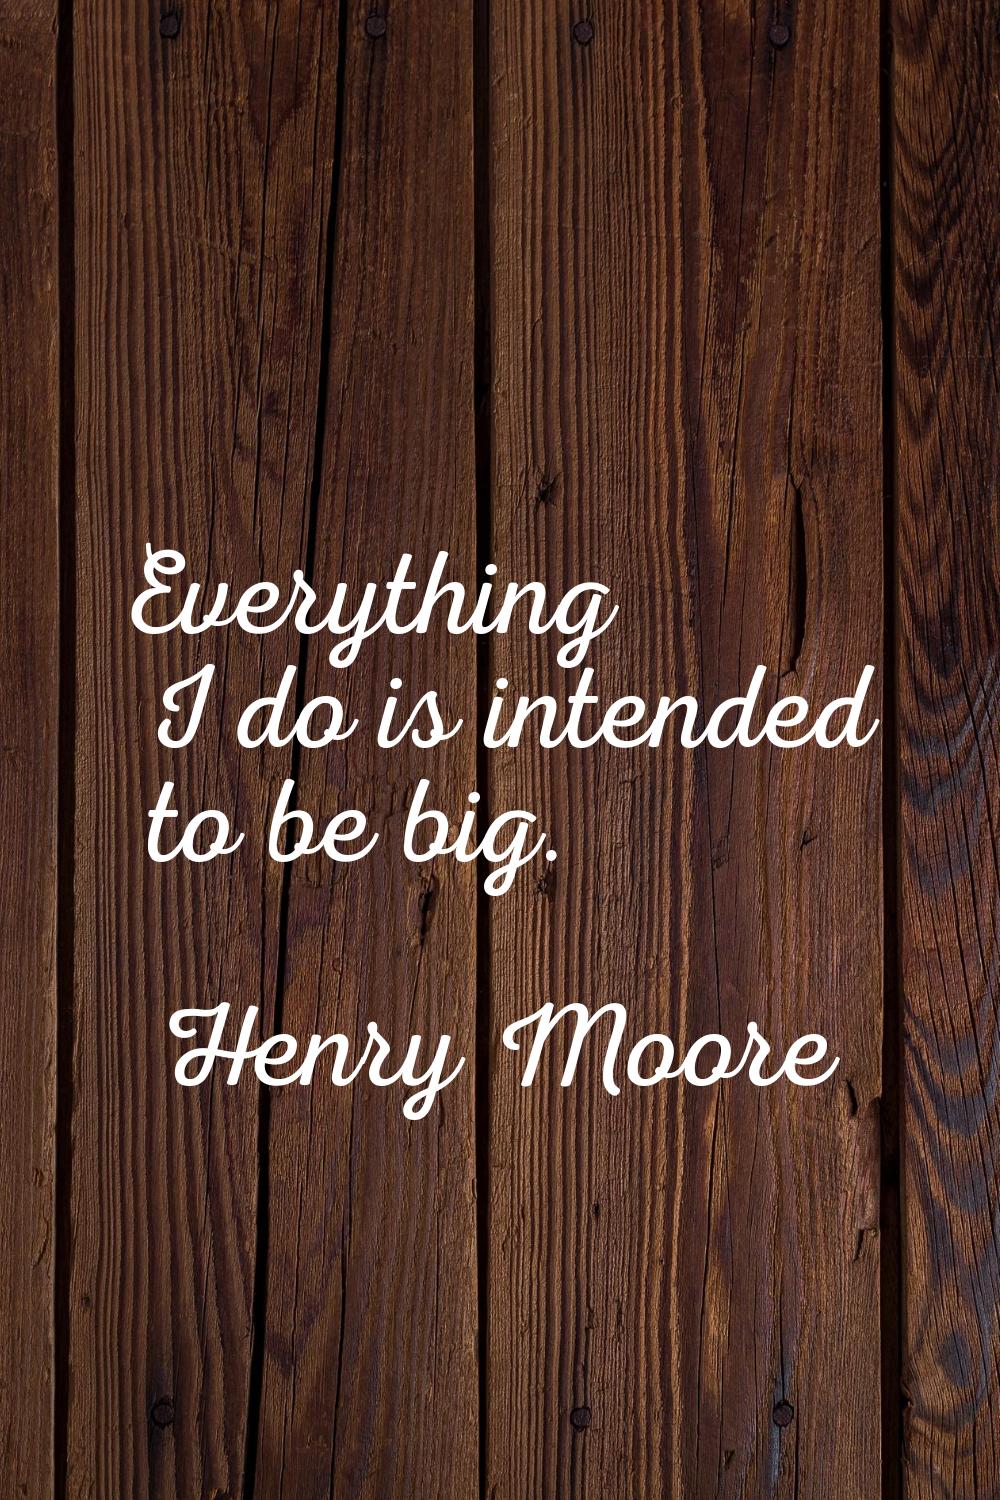 Everything I do is intended to be big.